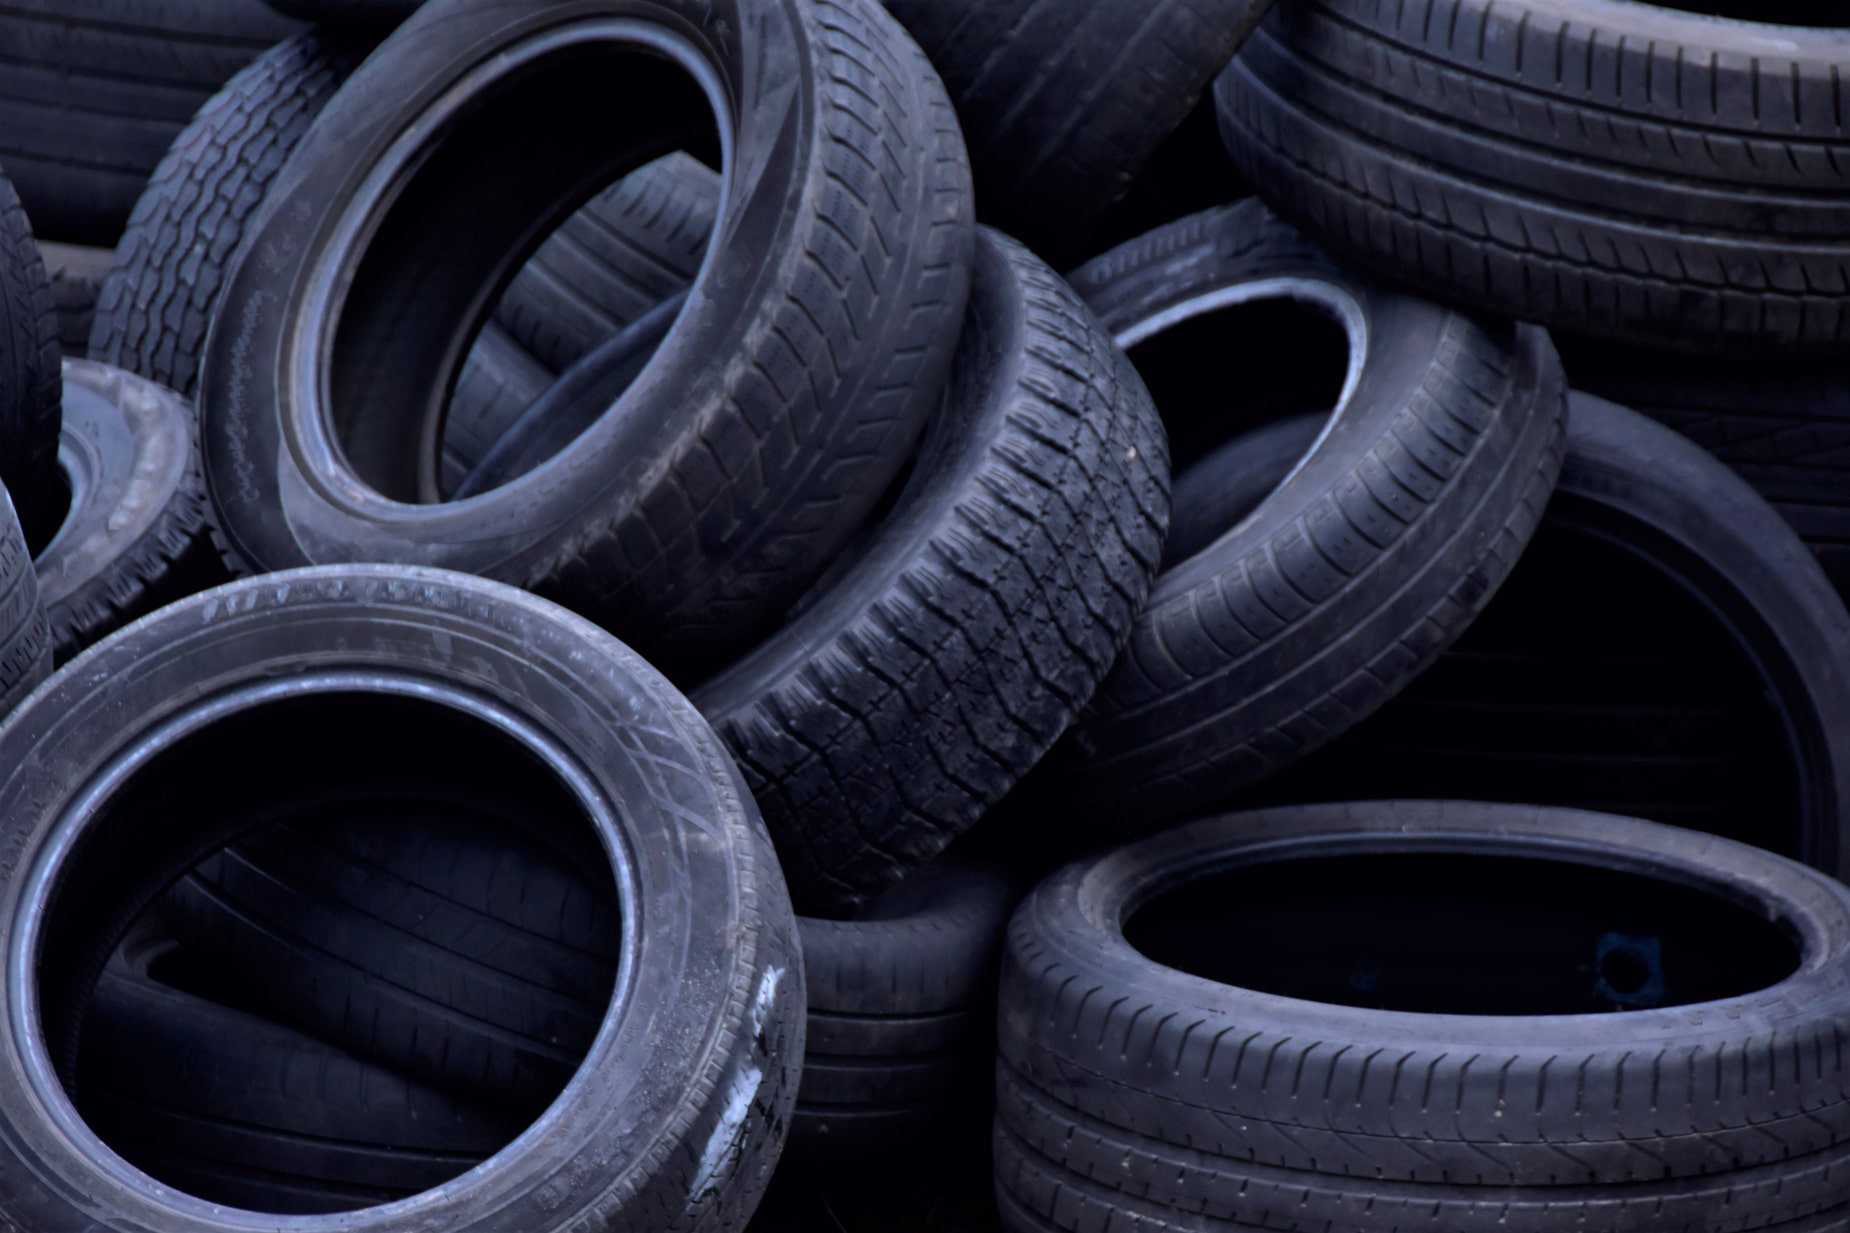 Farnham tyre recycling services